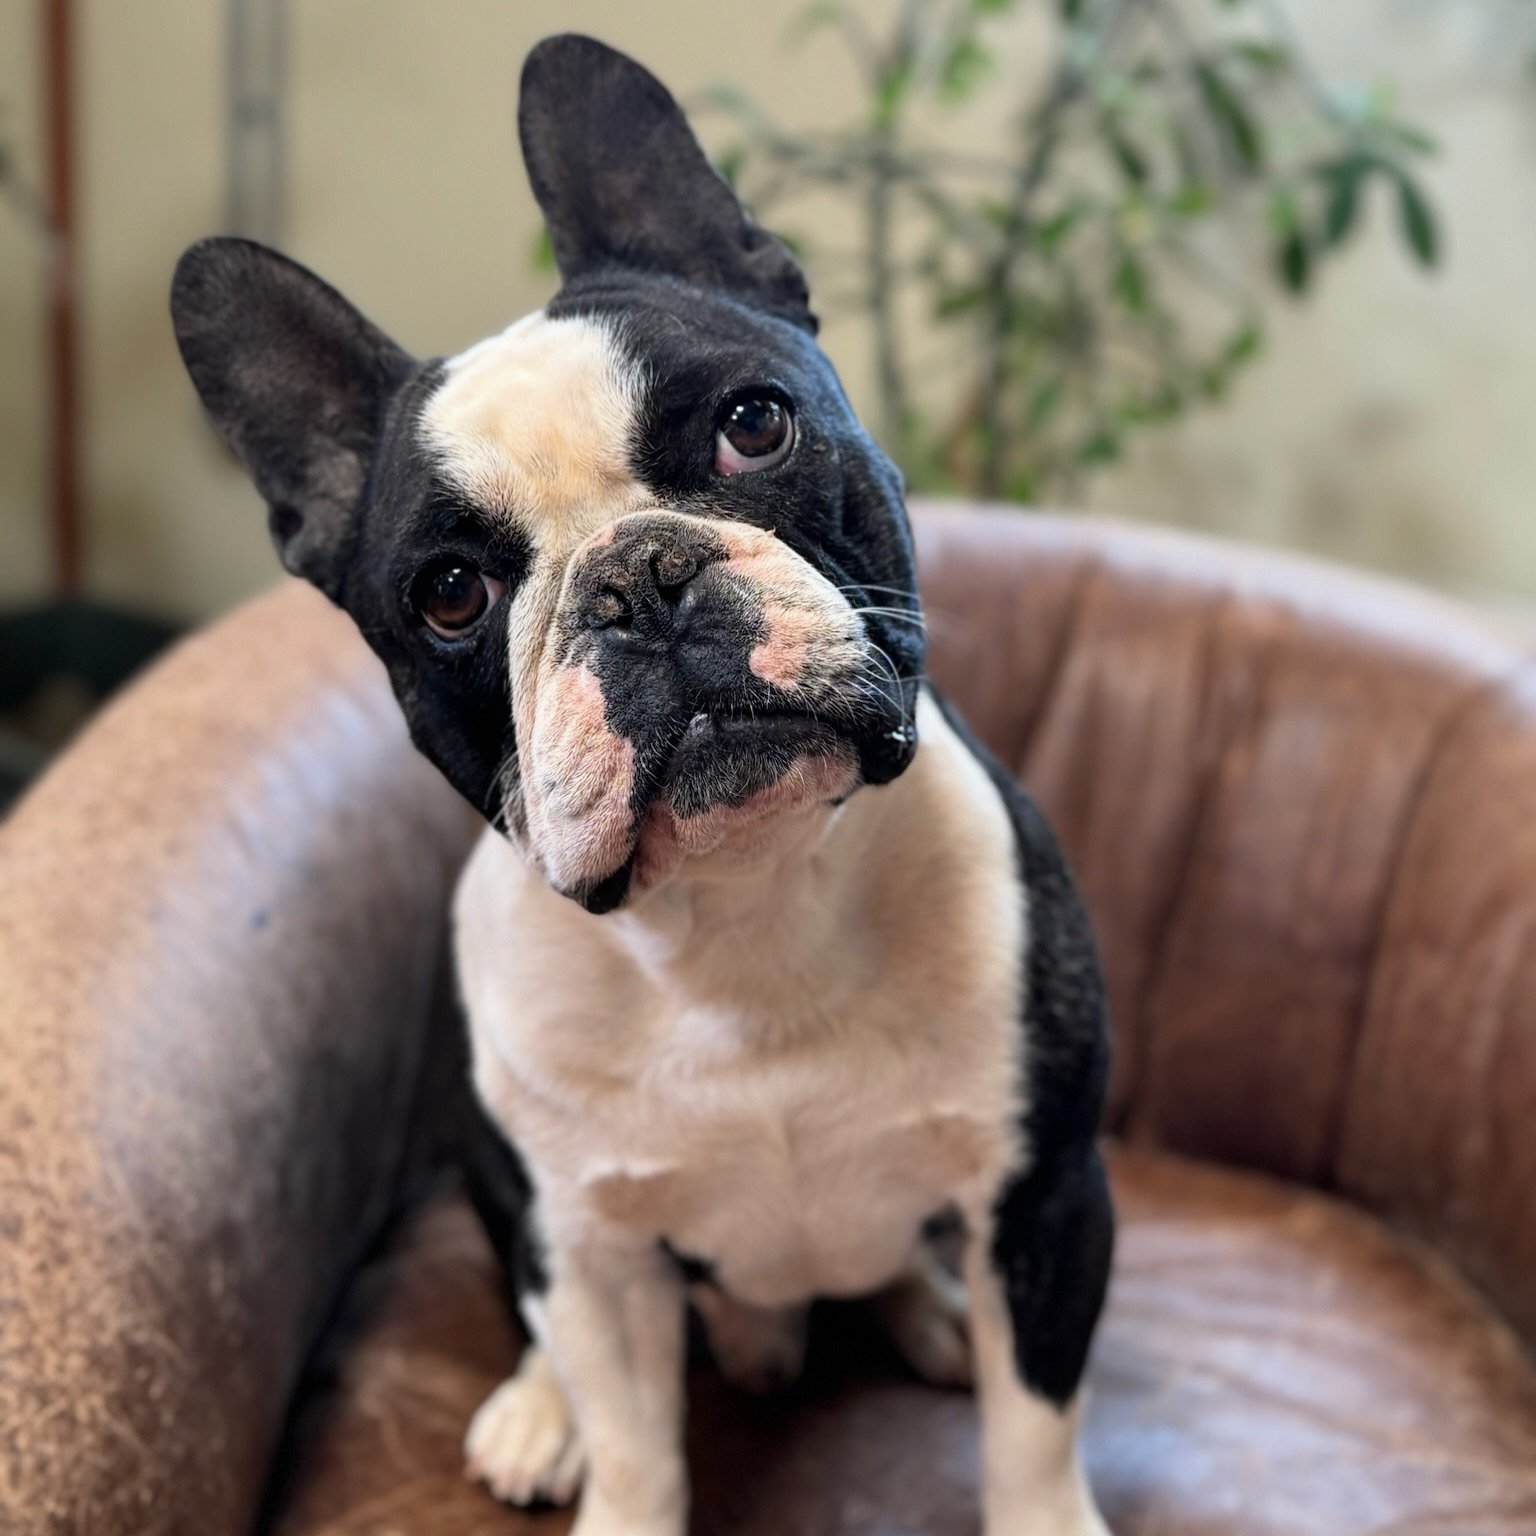 Meet Paul🐾

Paul a silly little dude! Frenchies are all little weirdos and he fits the bill. He makes friends with everyone he meets, and would love if you would play ball with him. 

#frenchbulldog #frenchbulldogs #frenchbulldogsofinstagram #french